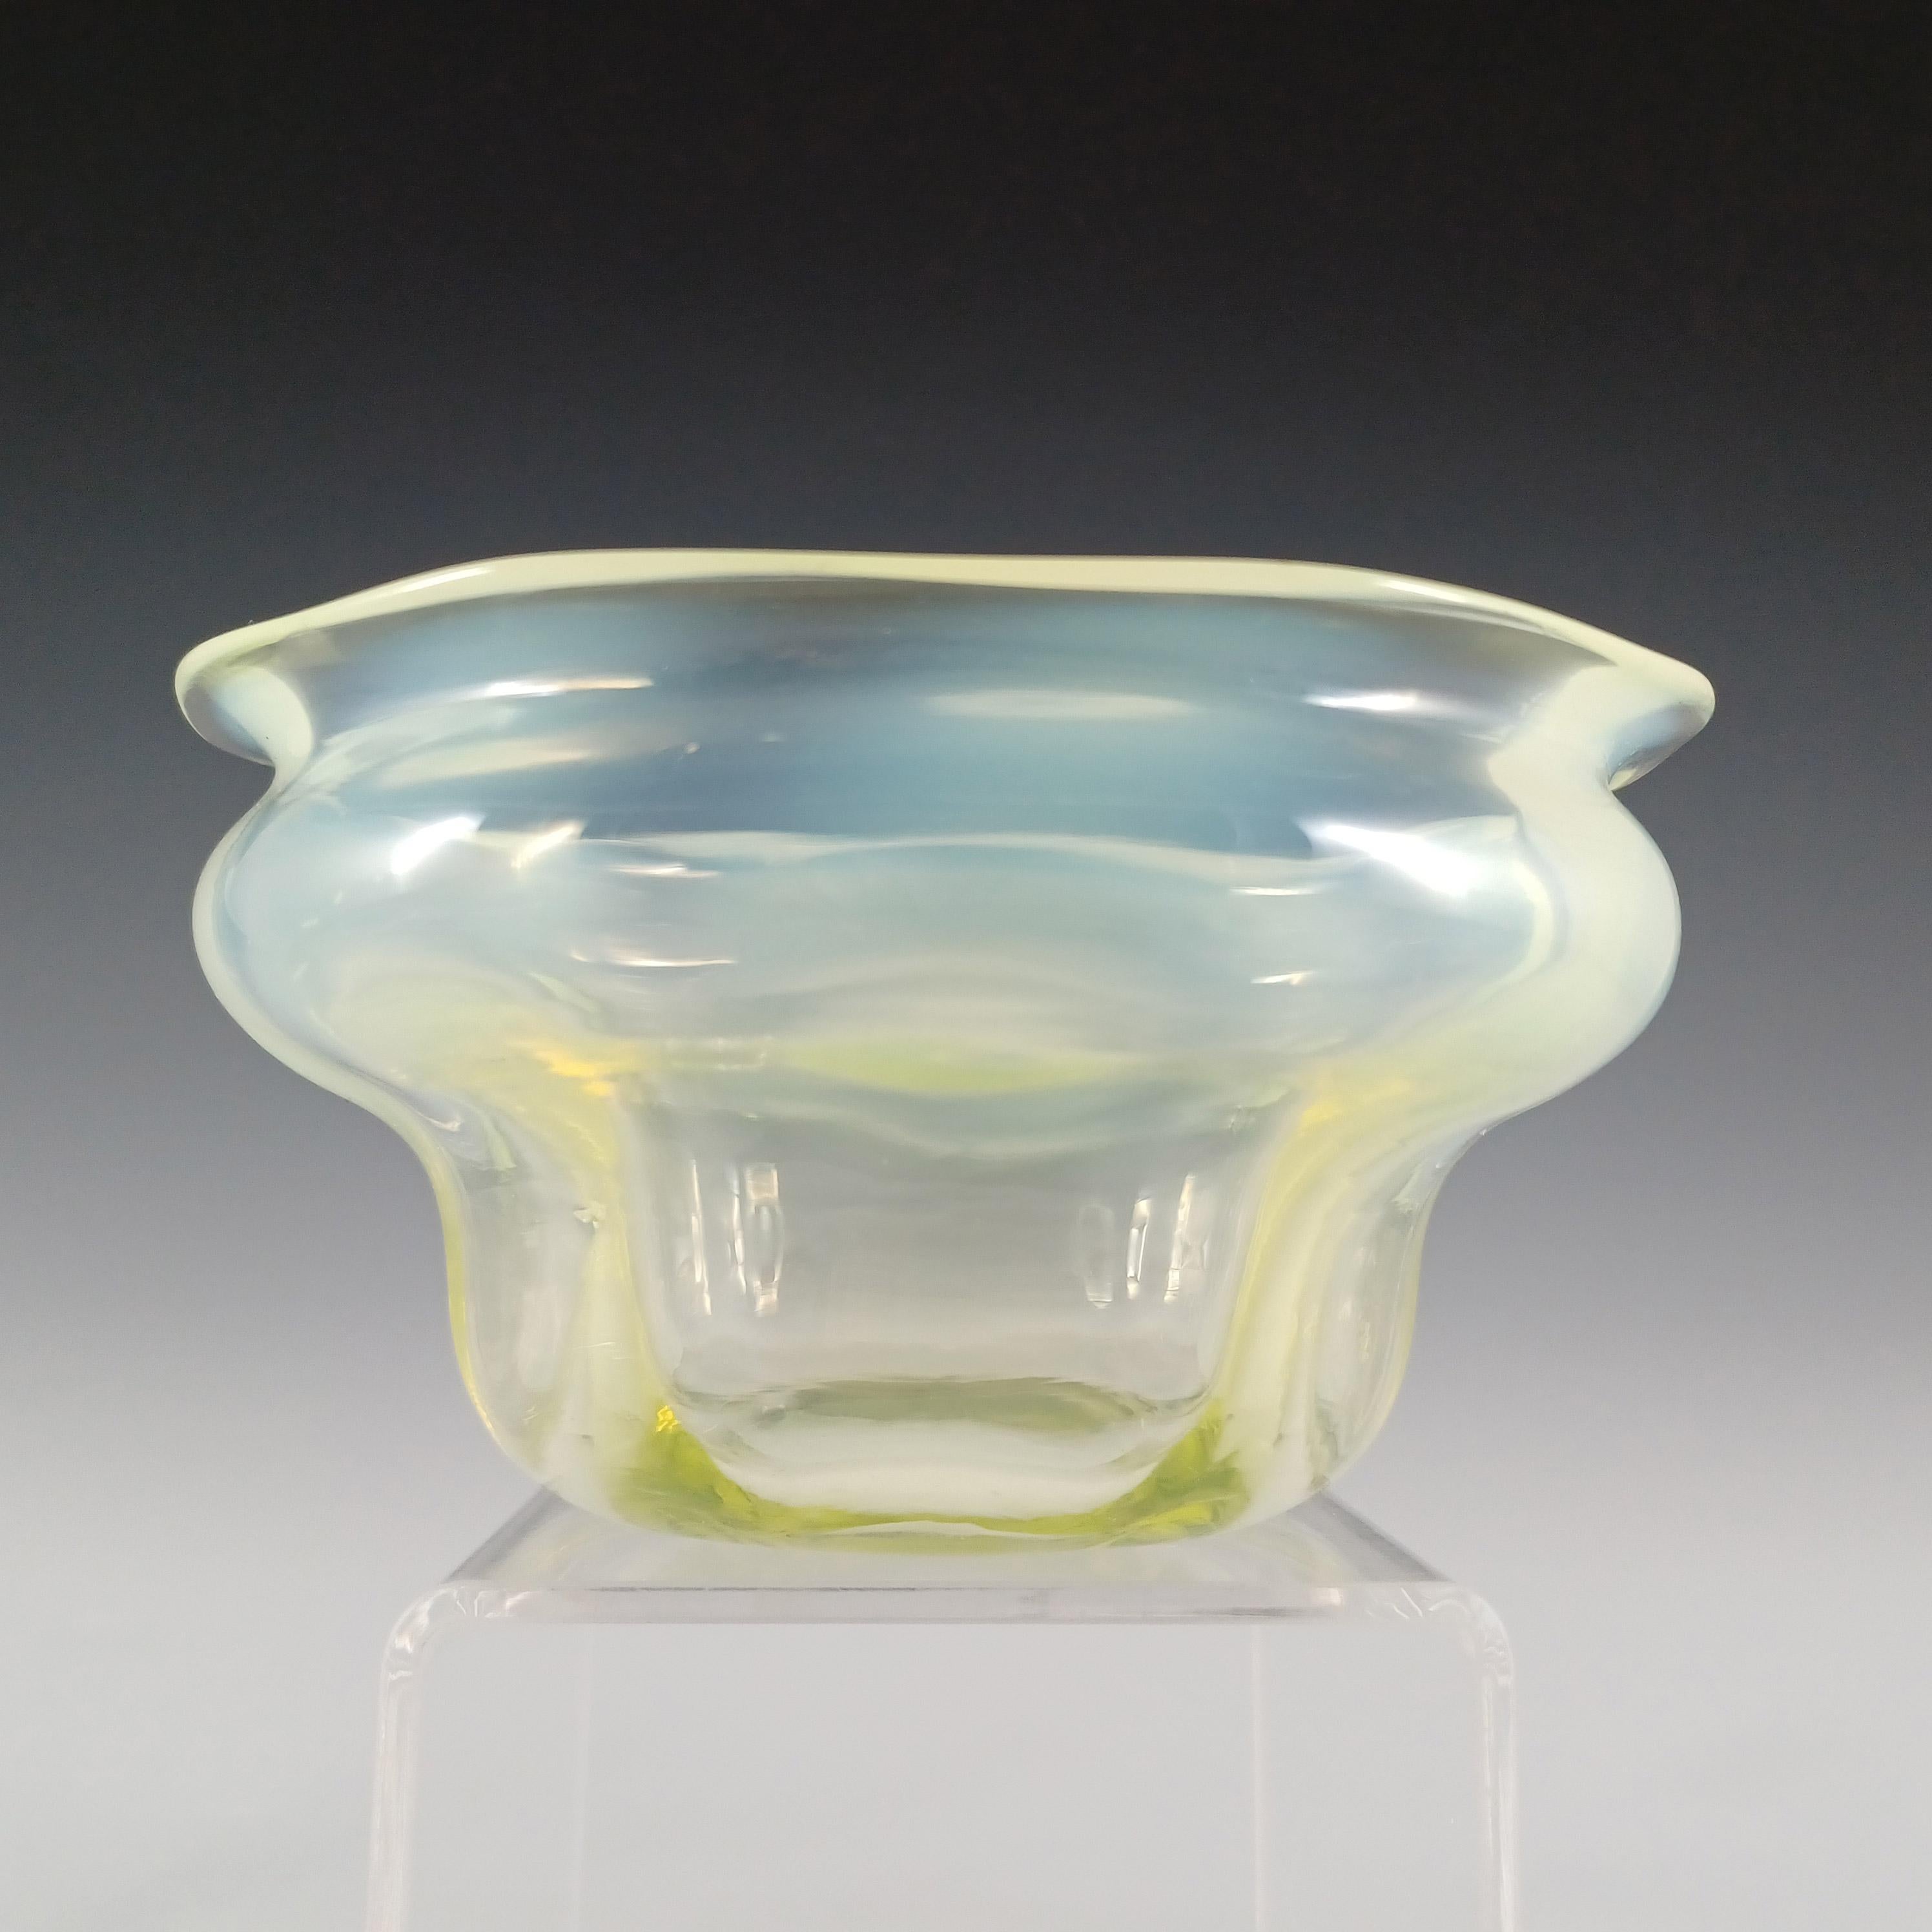 A wonderful Victorian yellow green vaseline glass bowl, with opalescent patches, circa 1890's. Made in uranium glass, which glows bright green in UV light. Probably English in origin. Quality ground and polished concave pontil mark to the